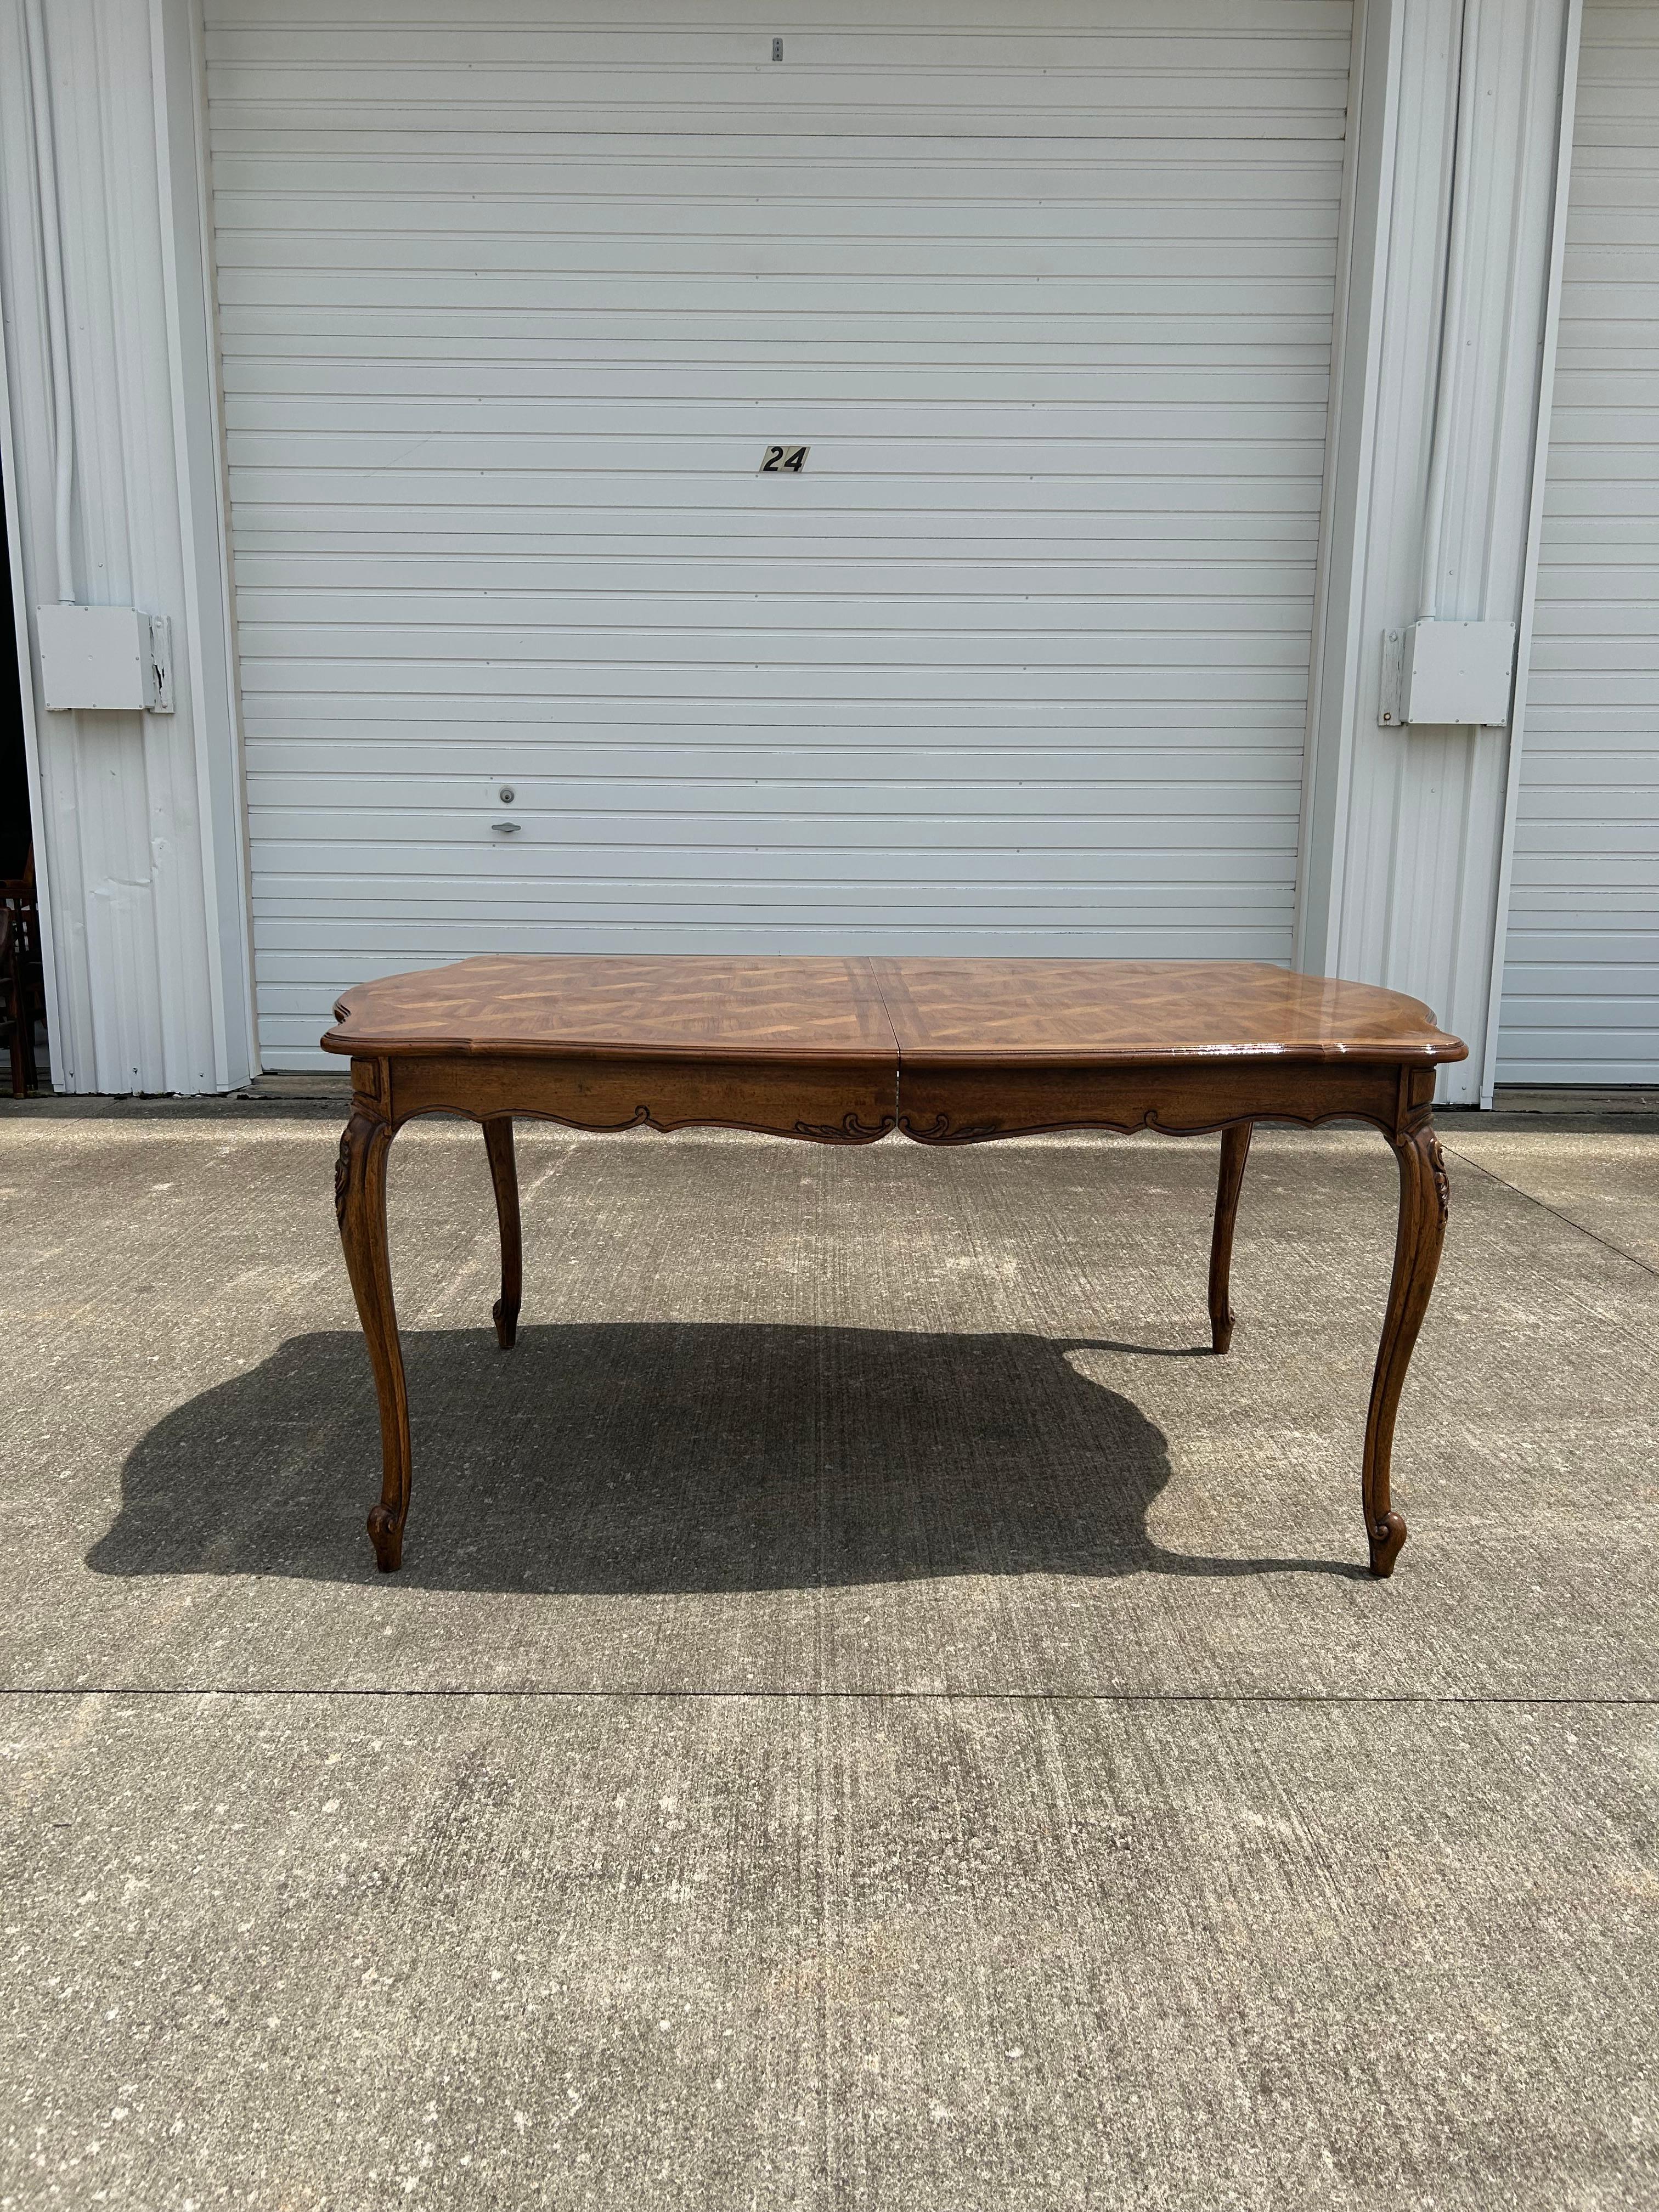 Beautiful Thomasville French Provincial Dining Table. The top of this table is gorgeous and an eye catcher! It is in great condition, only light wear due to the age of it, no structural damages. The curves of the dining table also bring out the